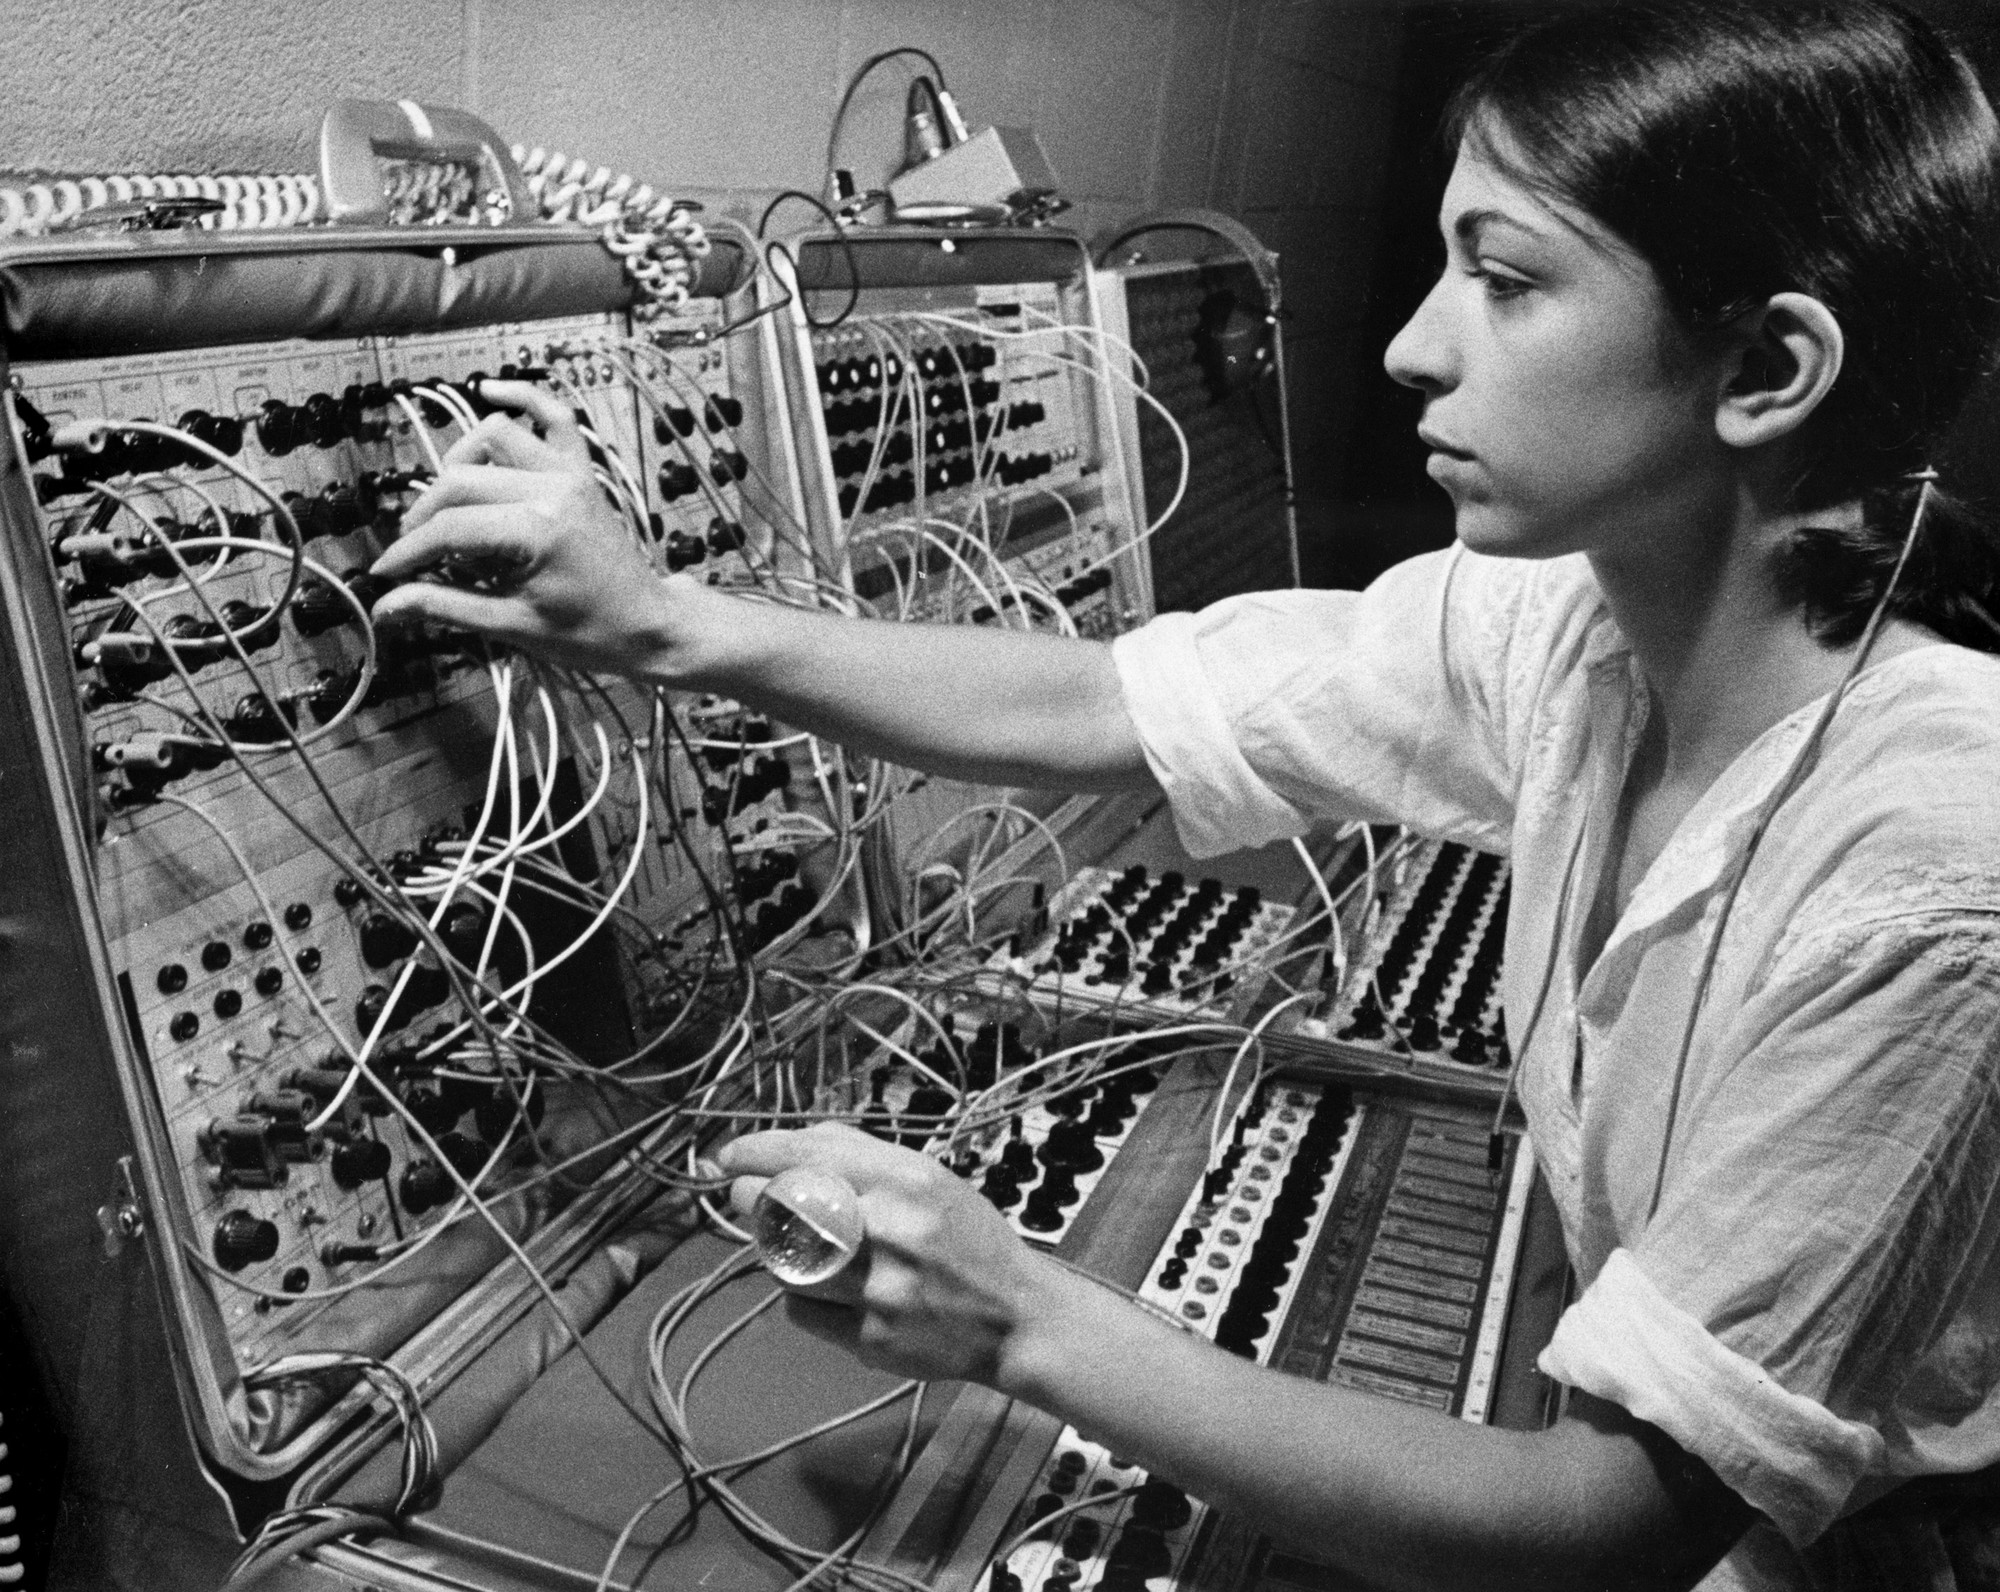 Suzanne Ciani's Improvisation on Four Sequences | MoMA